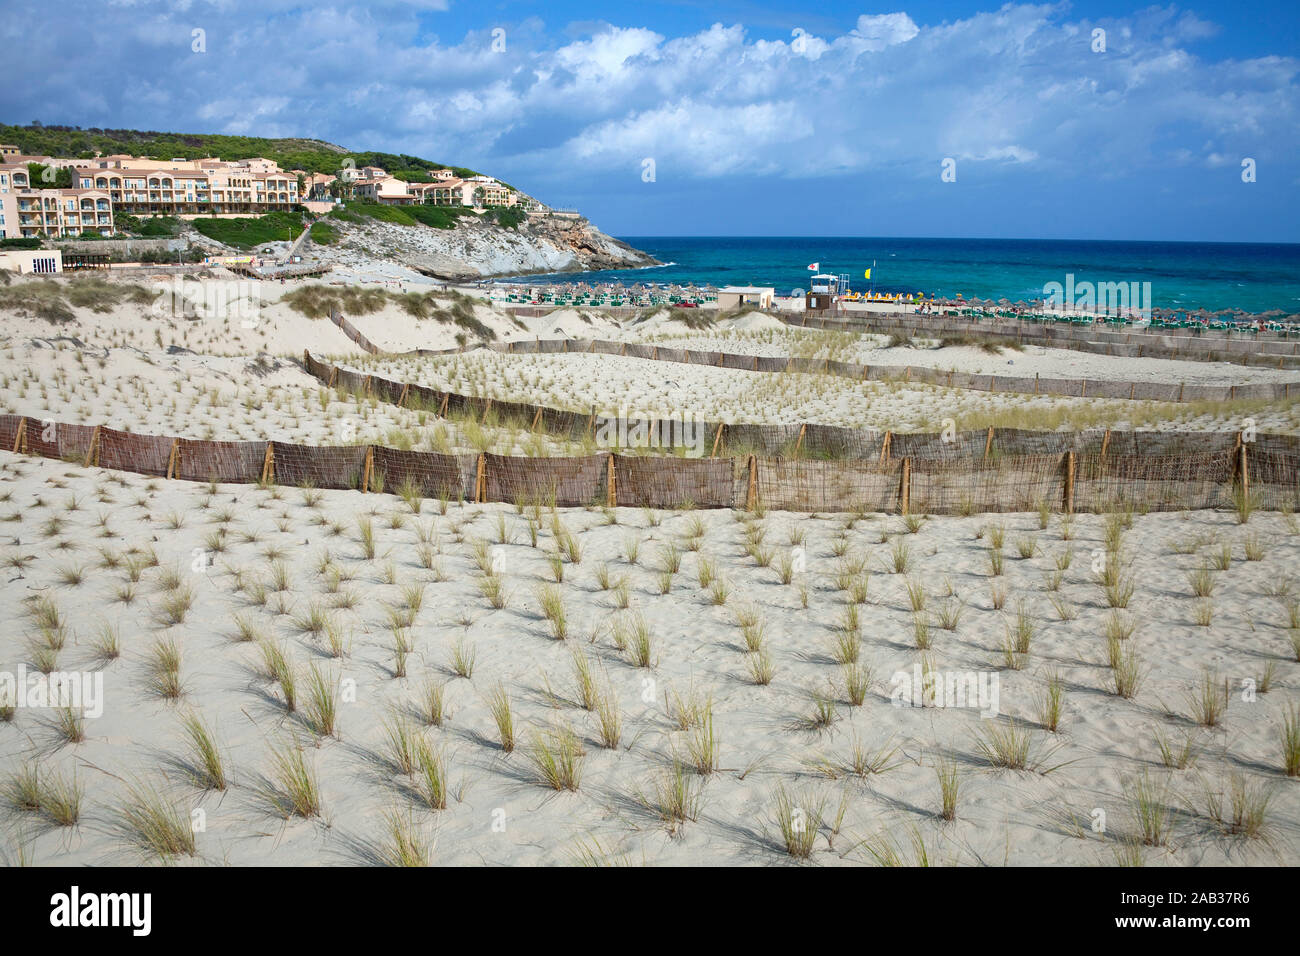 Protected area with dune grass, sourrounded by fence, conservation area at Cala Mesquida, Cala Ratjada, Mallorca, Balearic islands, Spain Stock Photo